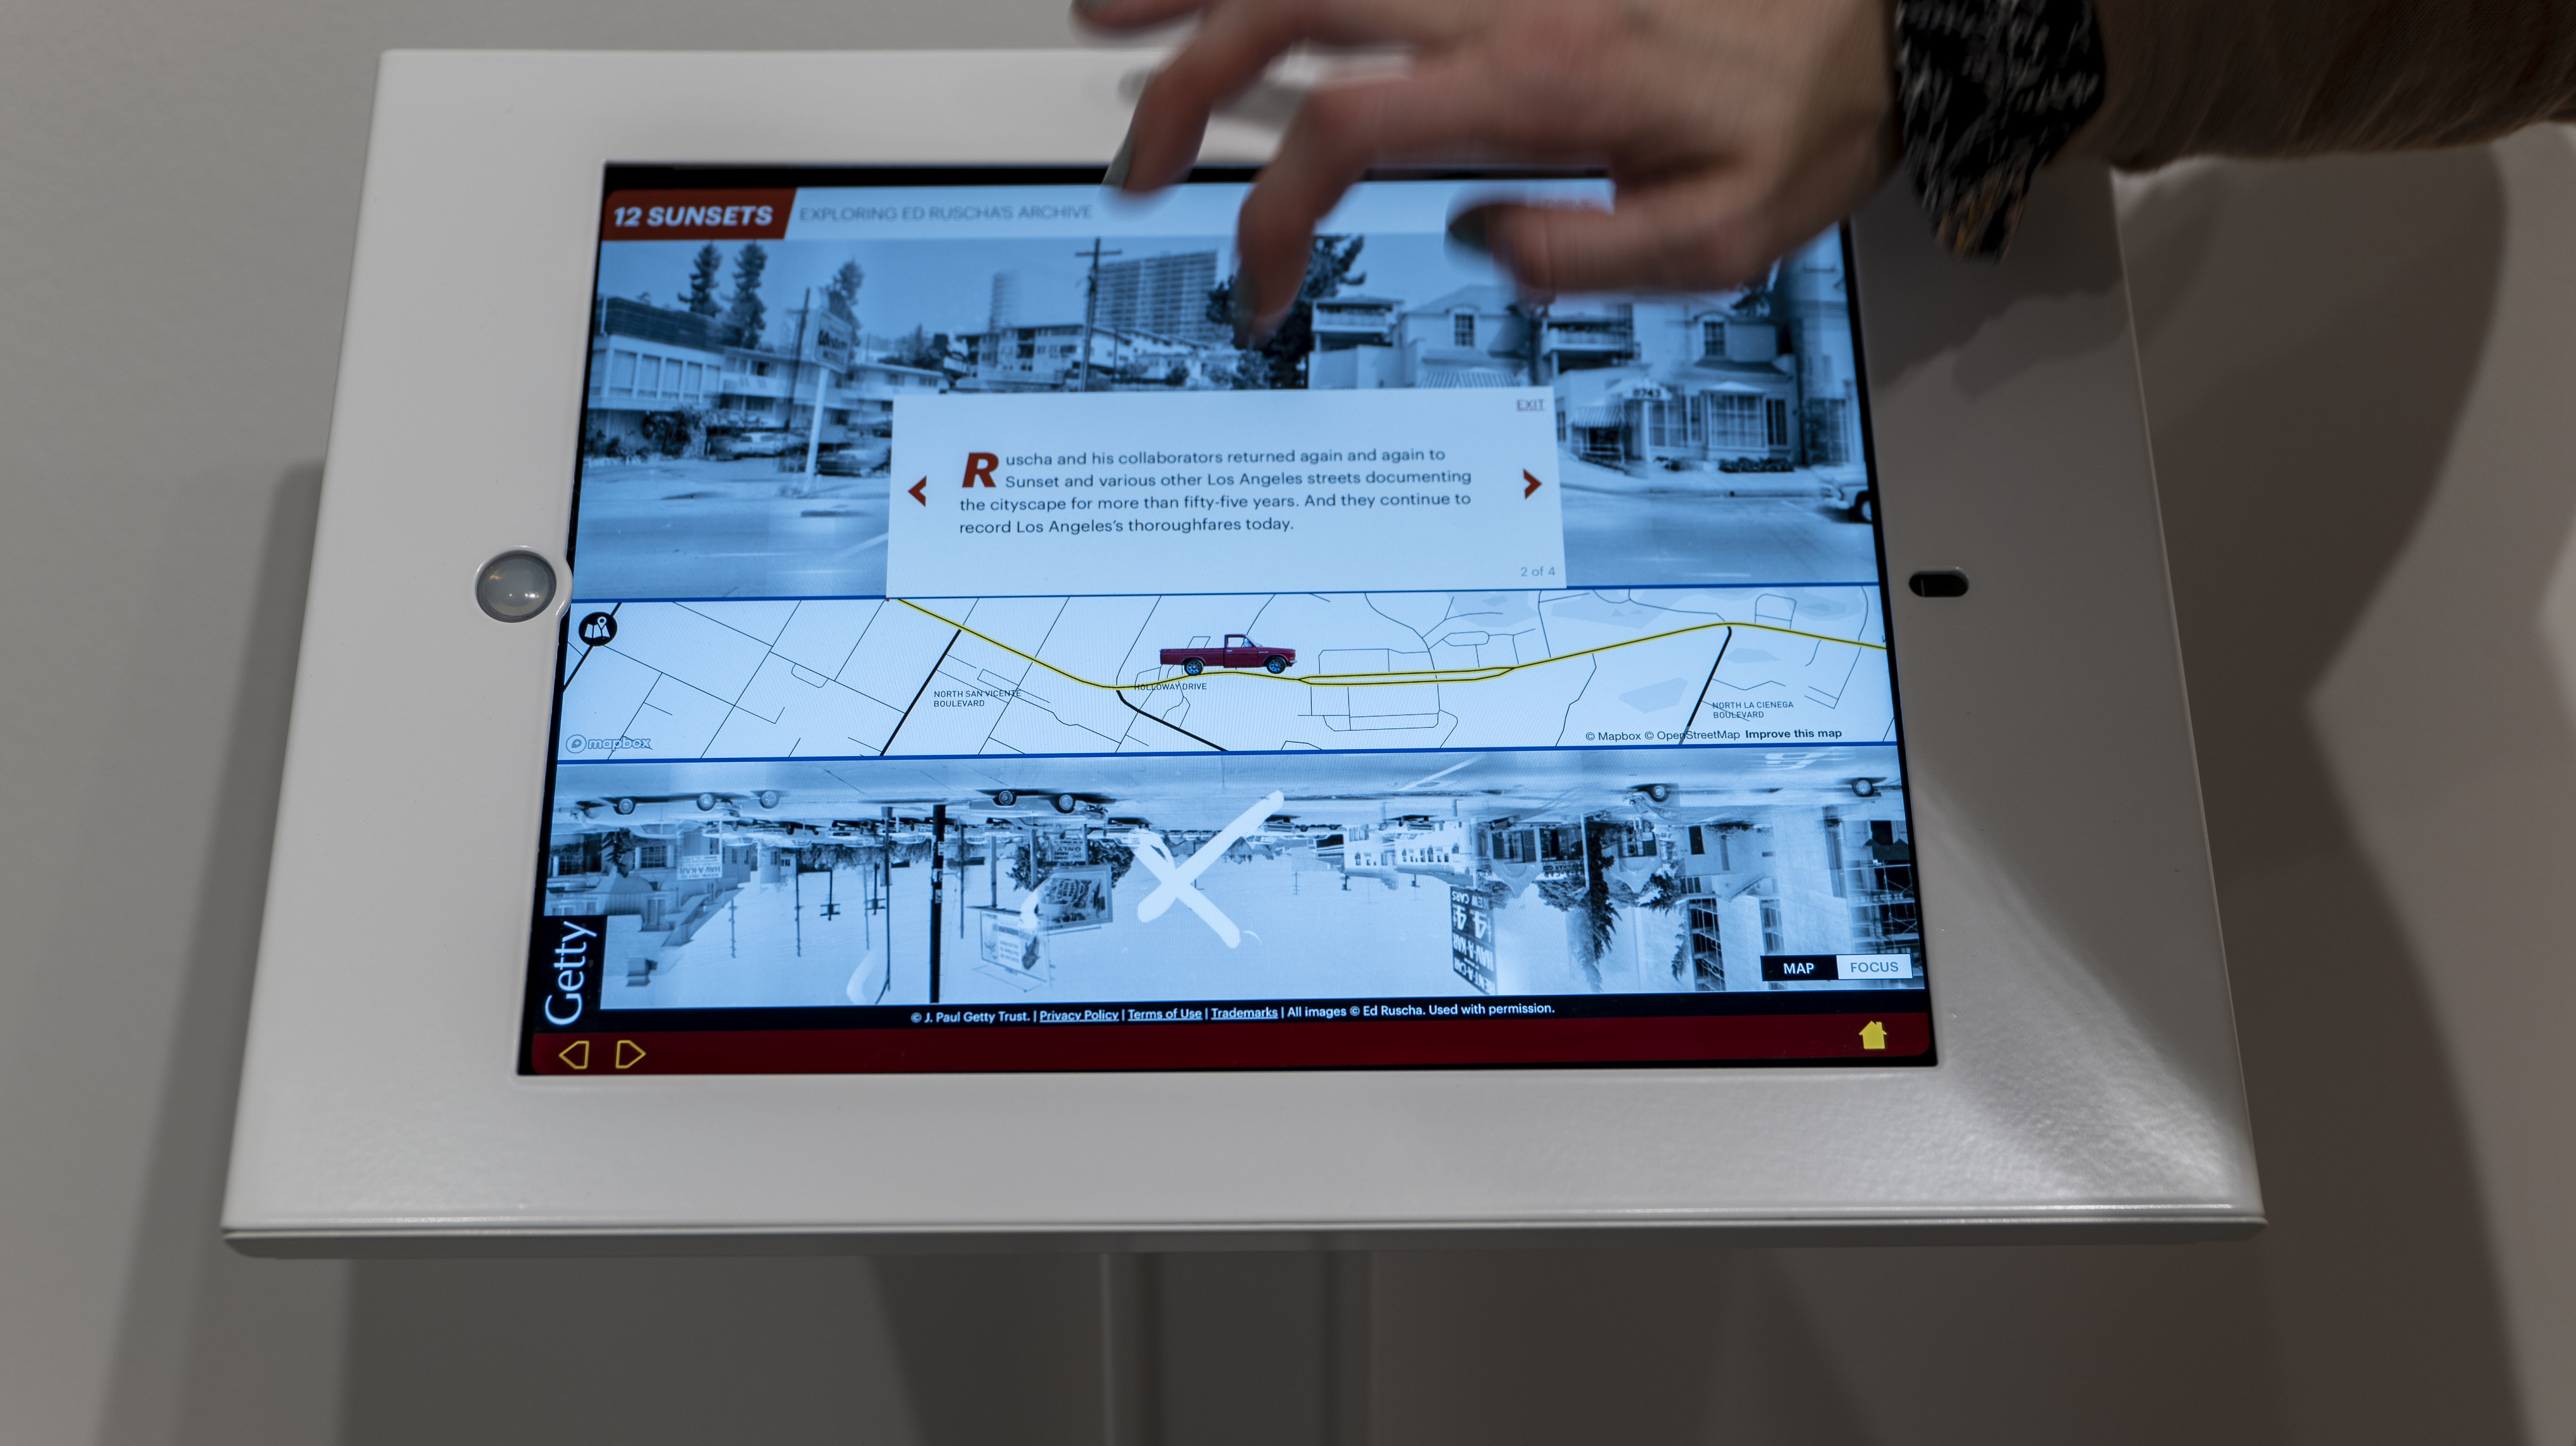 A hand manipulates an iPad touch screen depicting images of a street dense with cars and buildings